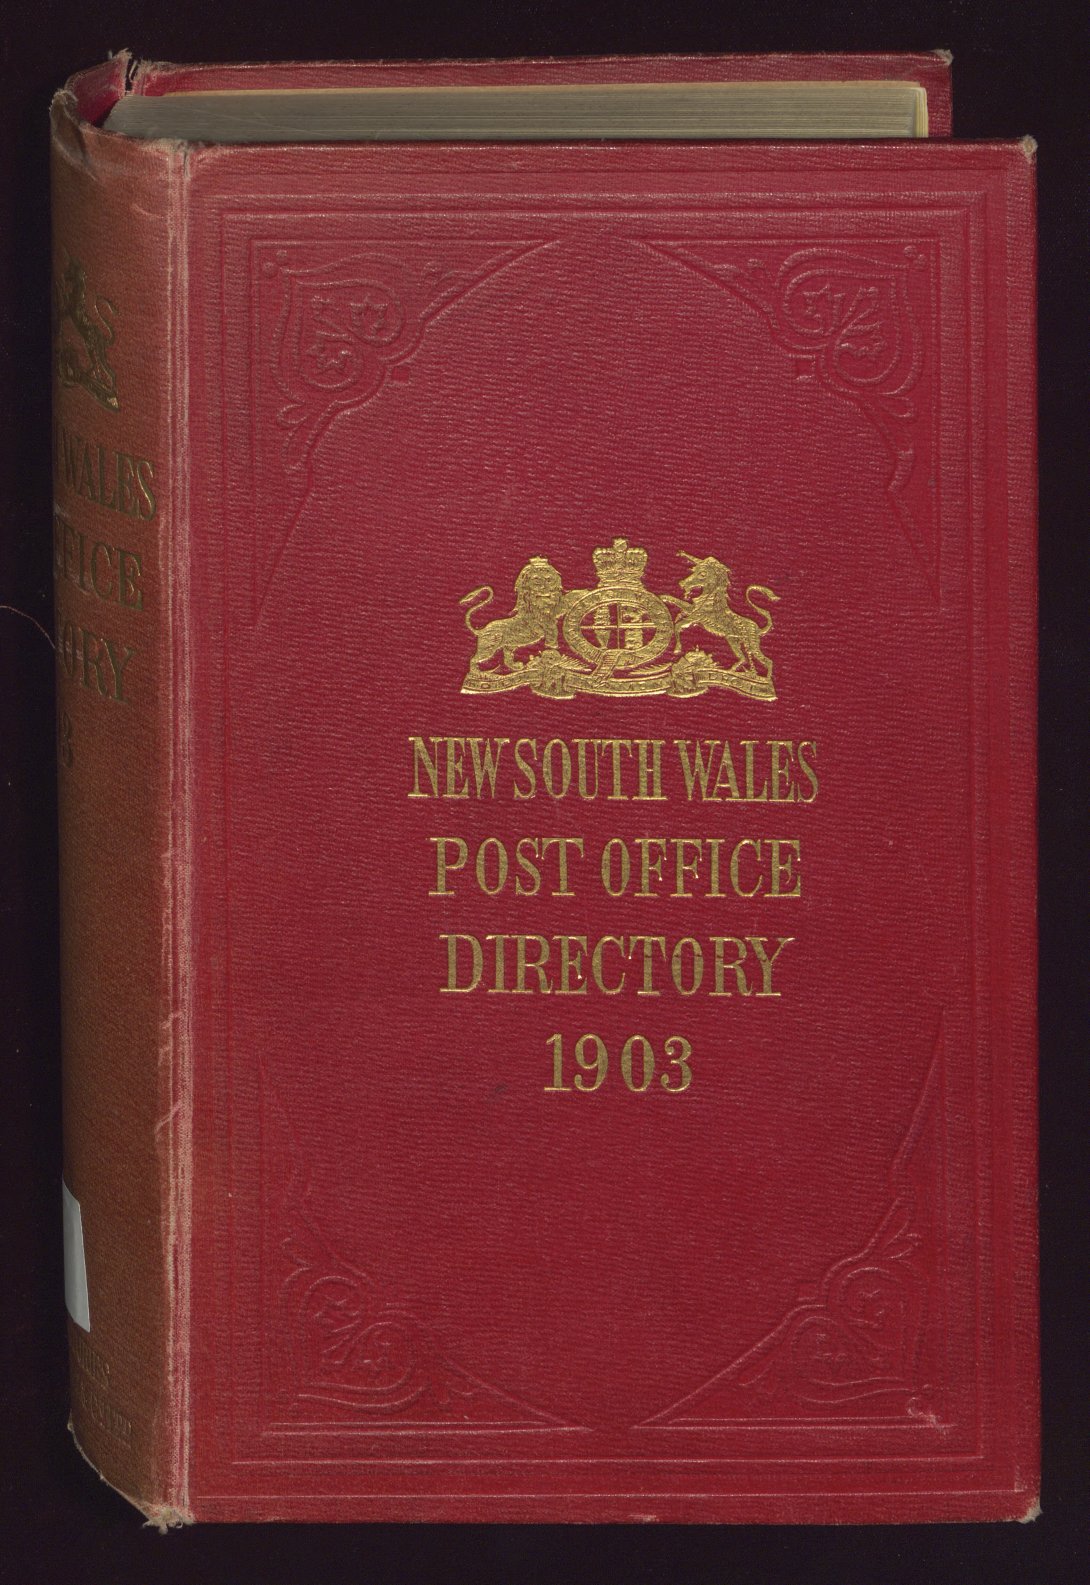 Old book with red leather cover with gold emblem and gold text reading 'NEW SOUTH WALES POST OFFICE DIRECTORY 1918'